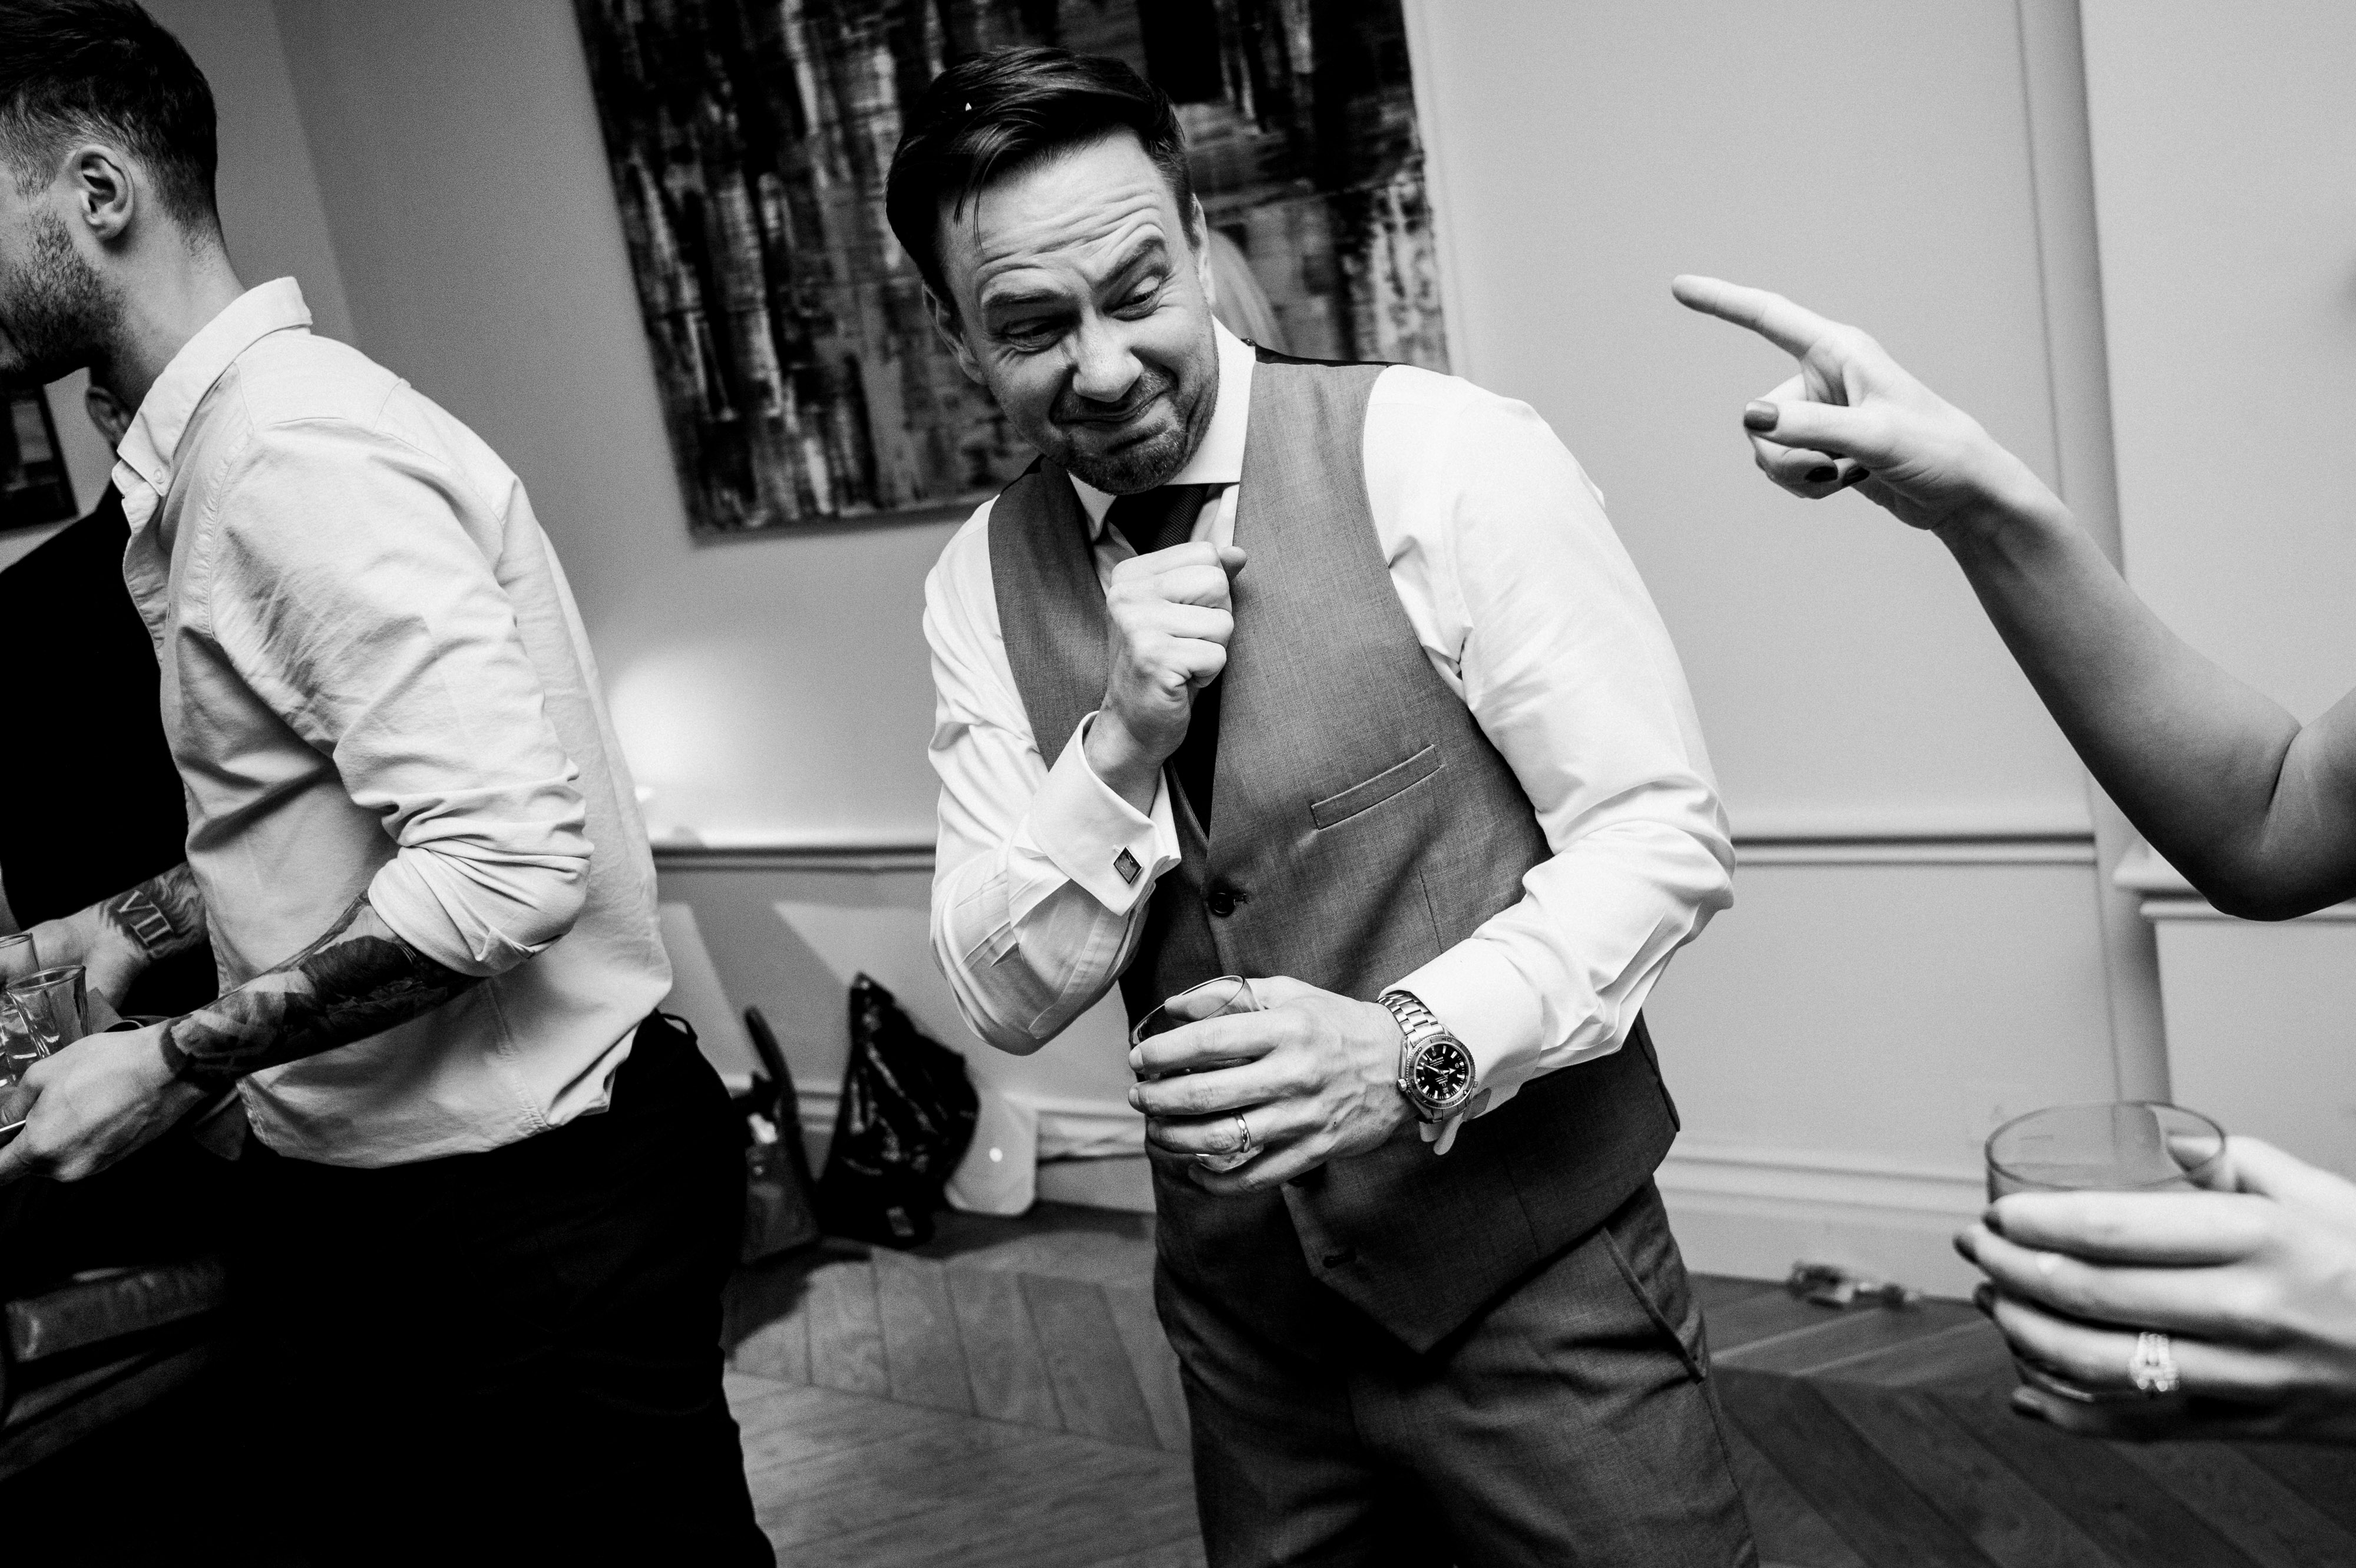 Dancing at Slaughters Manor House wedding